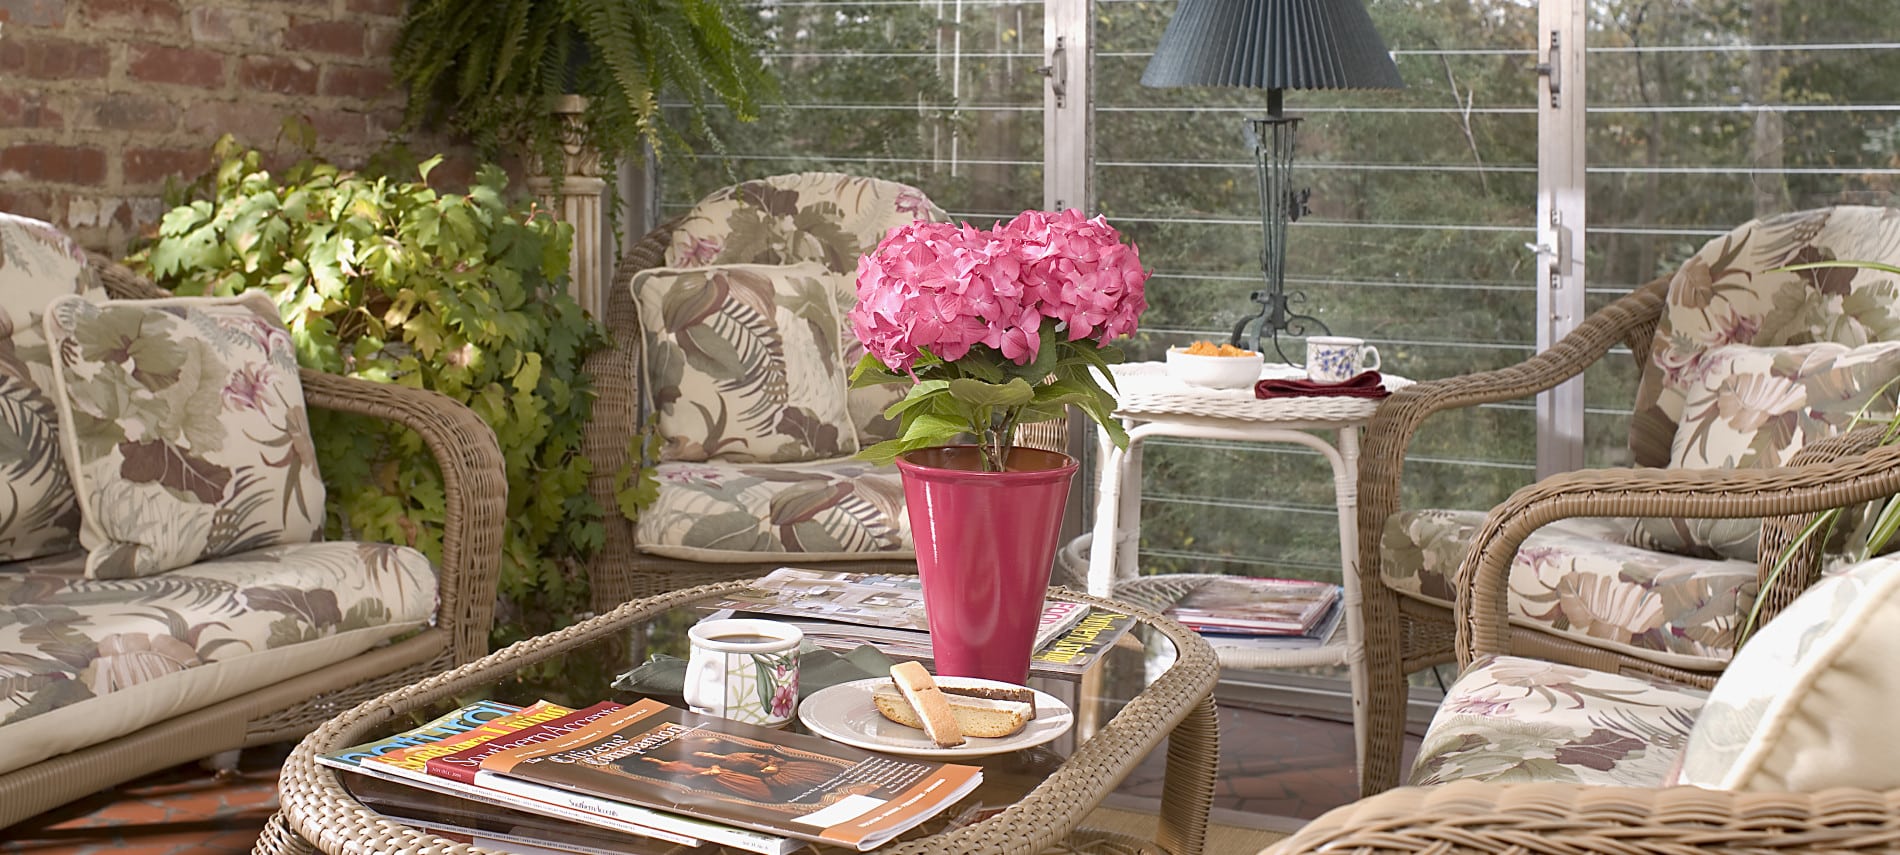 pink potted hydrangea plant on wicker and glass table with magazines and plate of biscotti